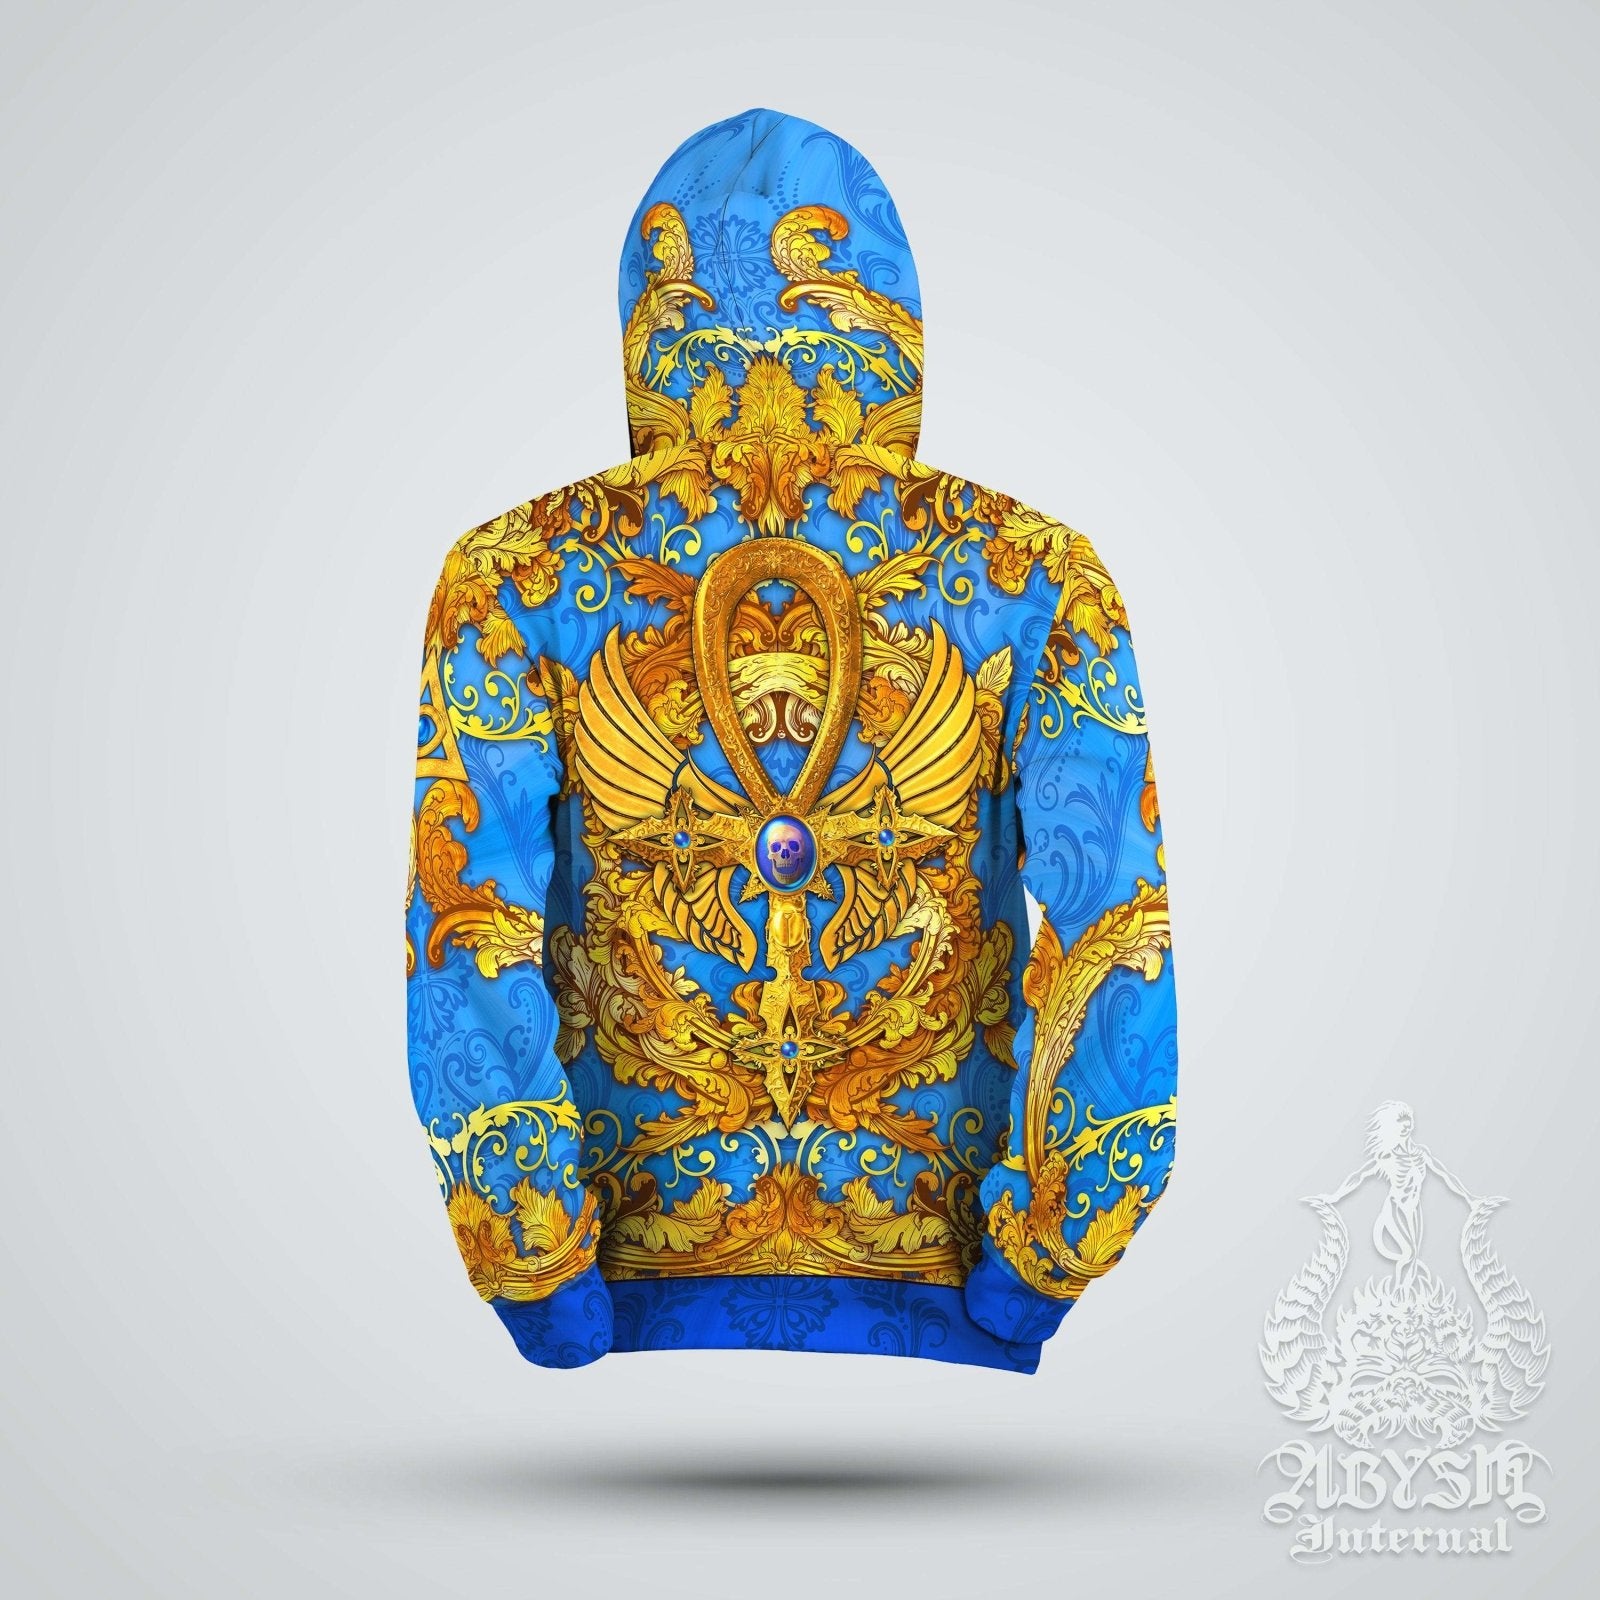 Graffiti Hoodie, Street Outfit, Rave Streetwear, Street Outfit, Festival Apparel, Alternative Clothing, Unisex - Ankh Cross, Cyan and Gold - Abysm Internal